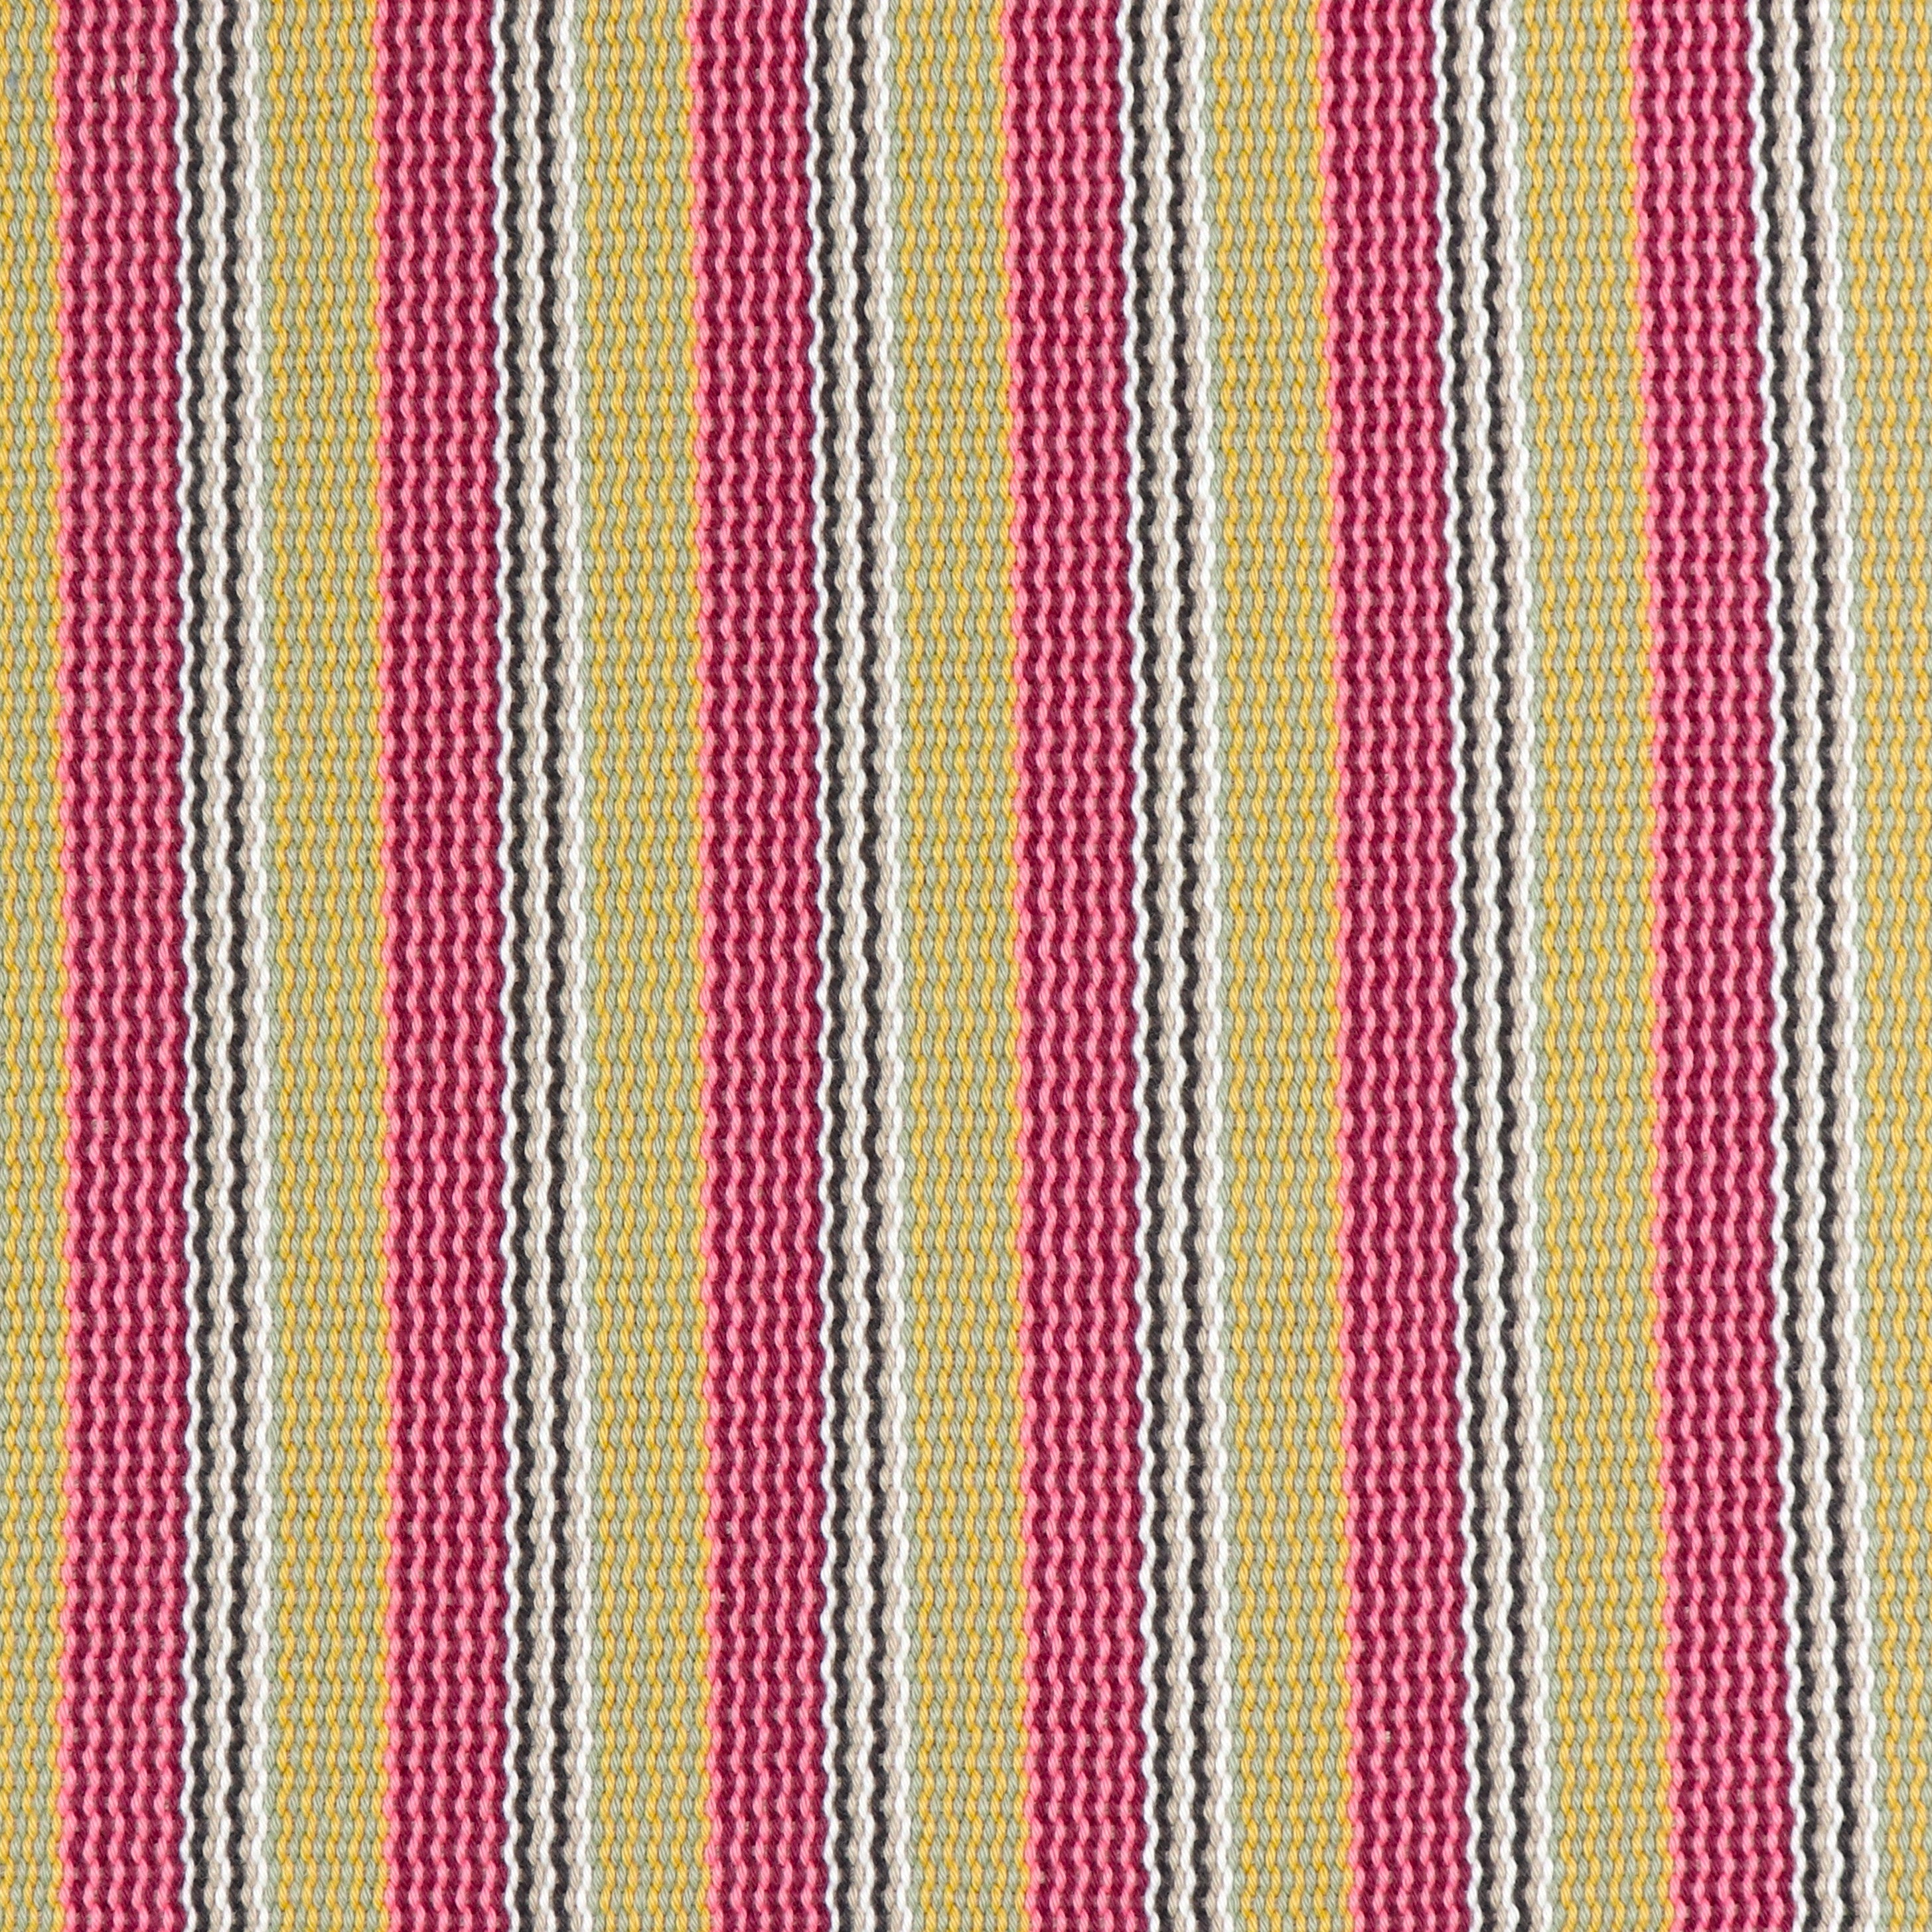 Detail of a hand-woven cotton fabric in a stripe pattern in shades of pink, yellow, red and brown.